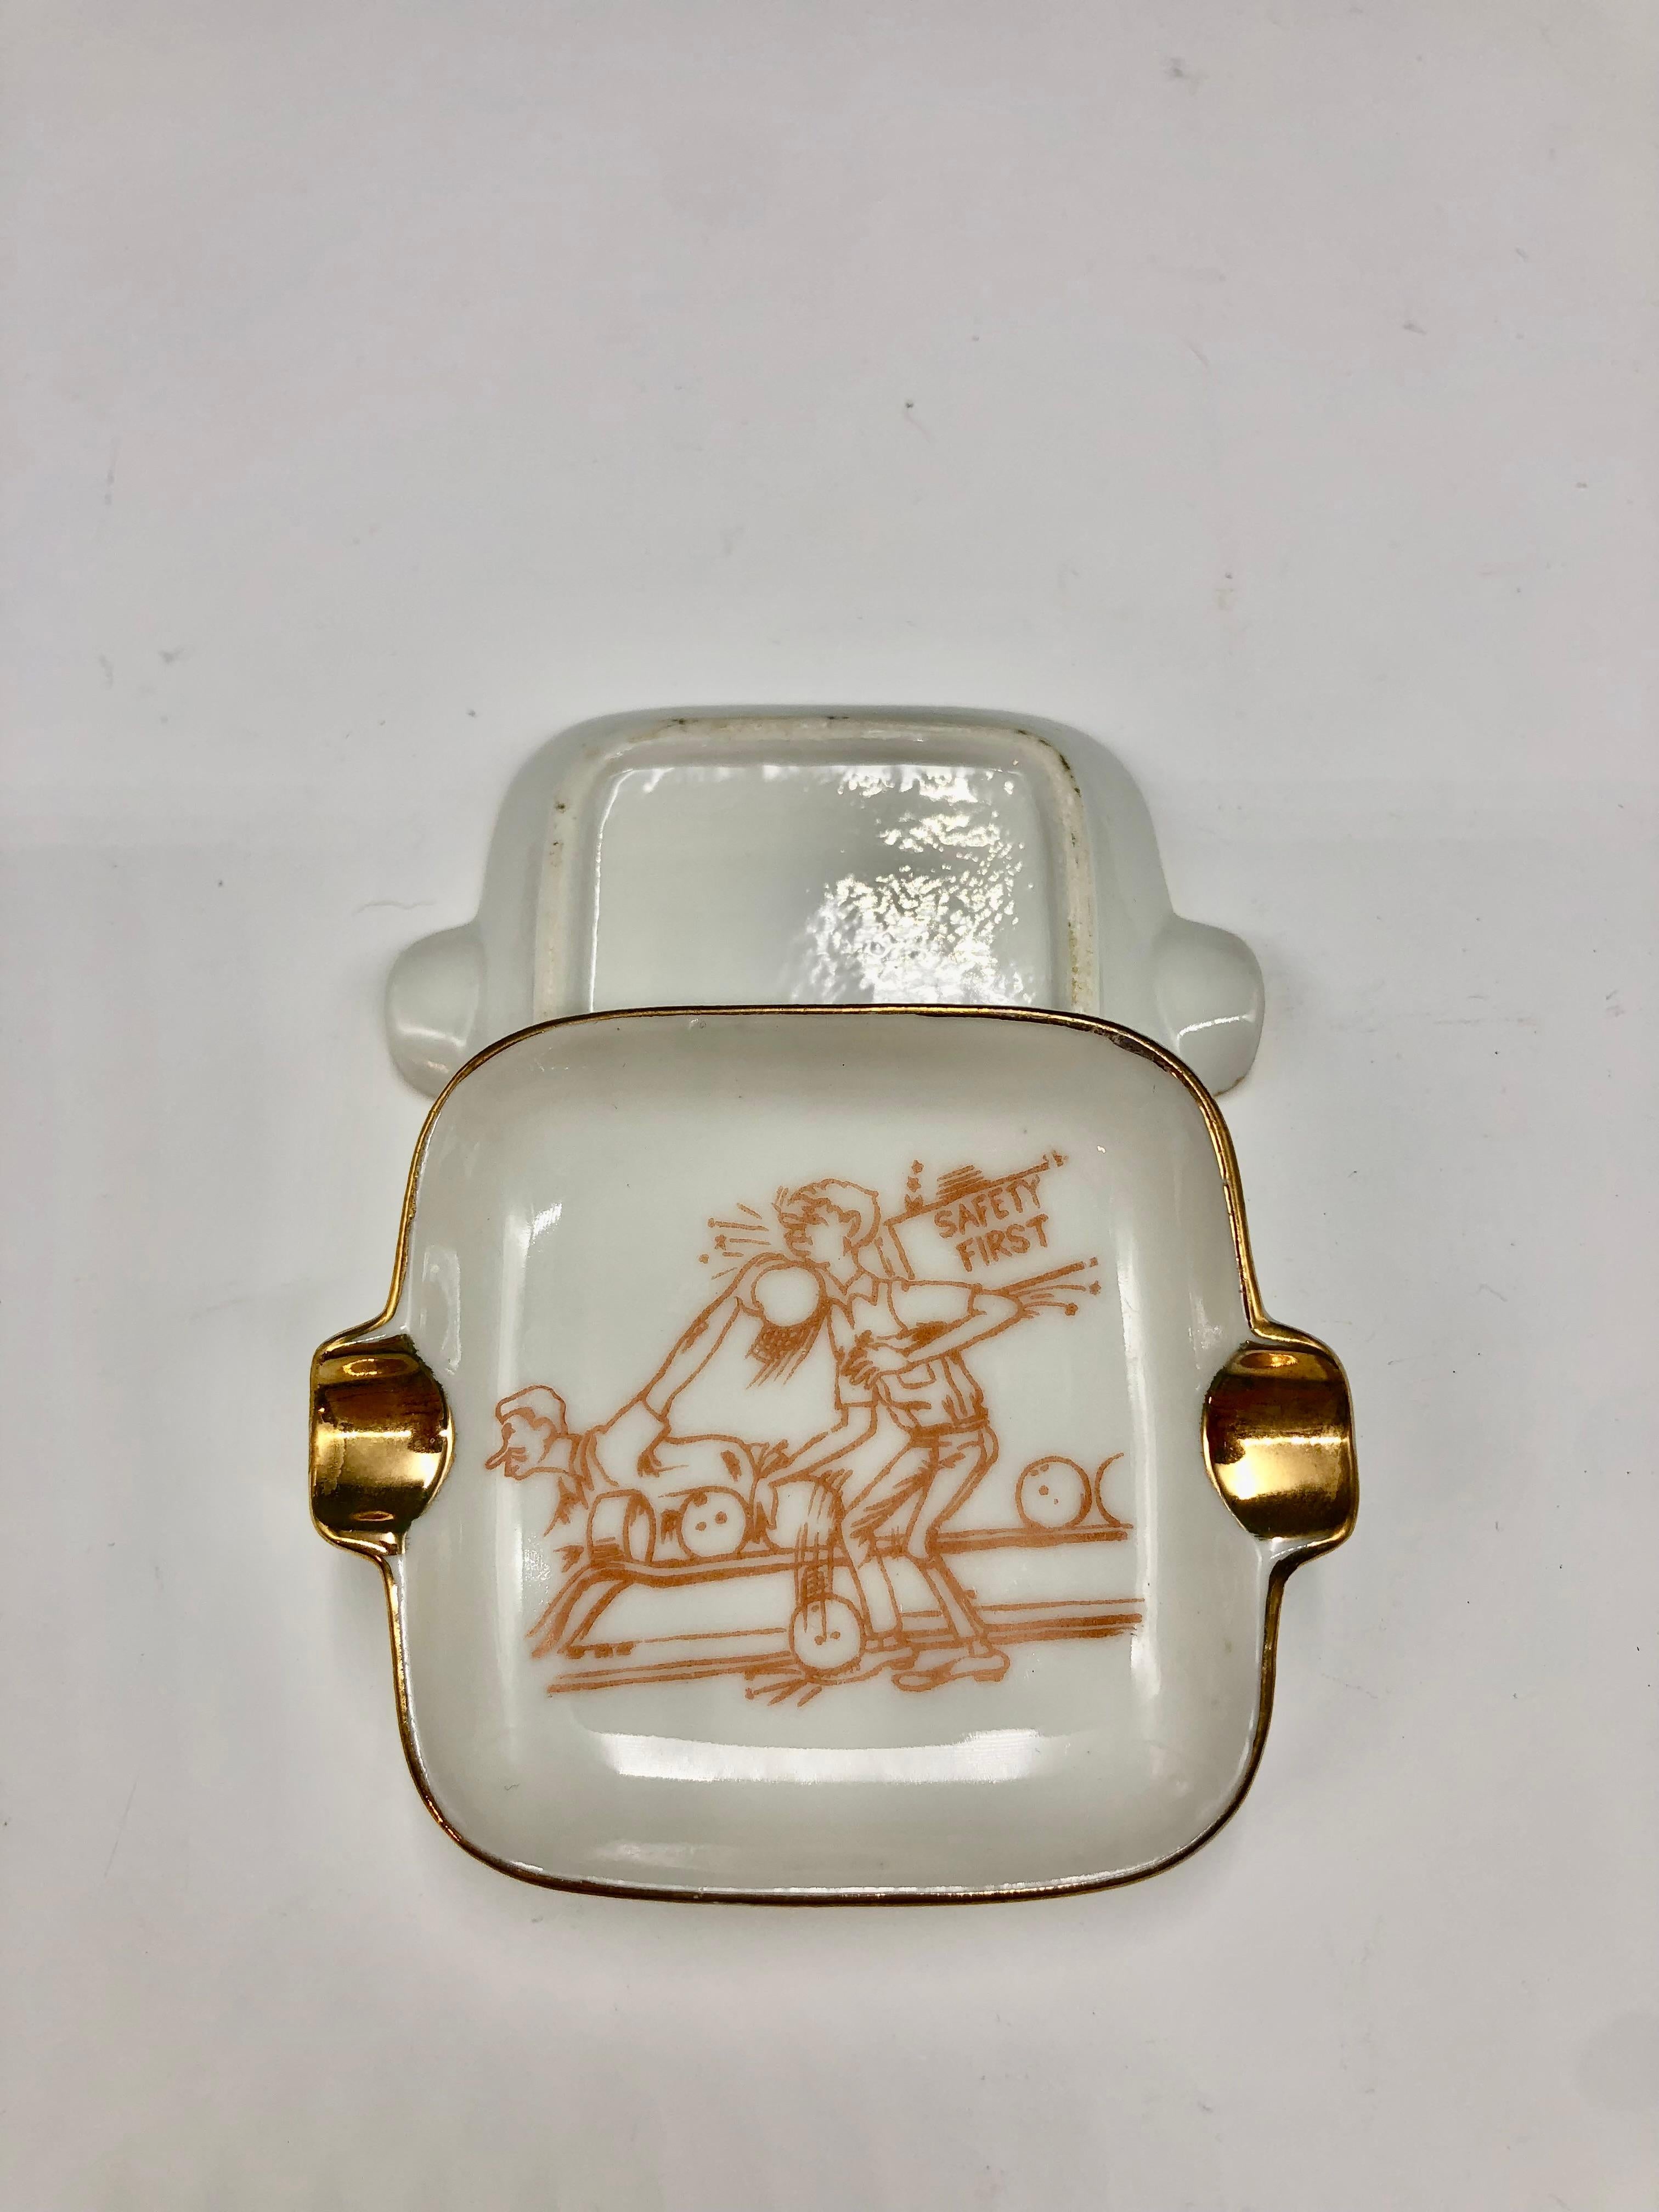 Vintage Set of 1970s Kitsch Porcelain Figurative Ashtrays - American Modern Sculpture by Unknown